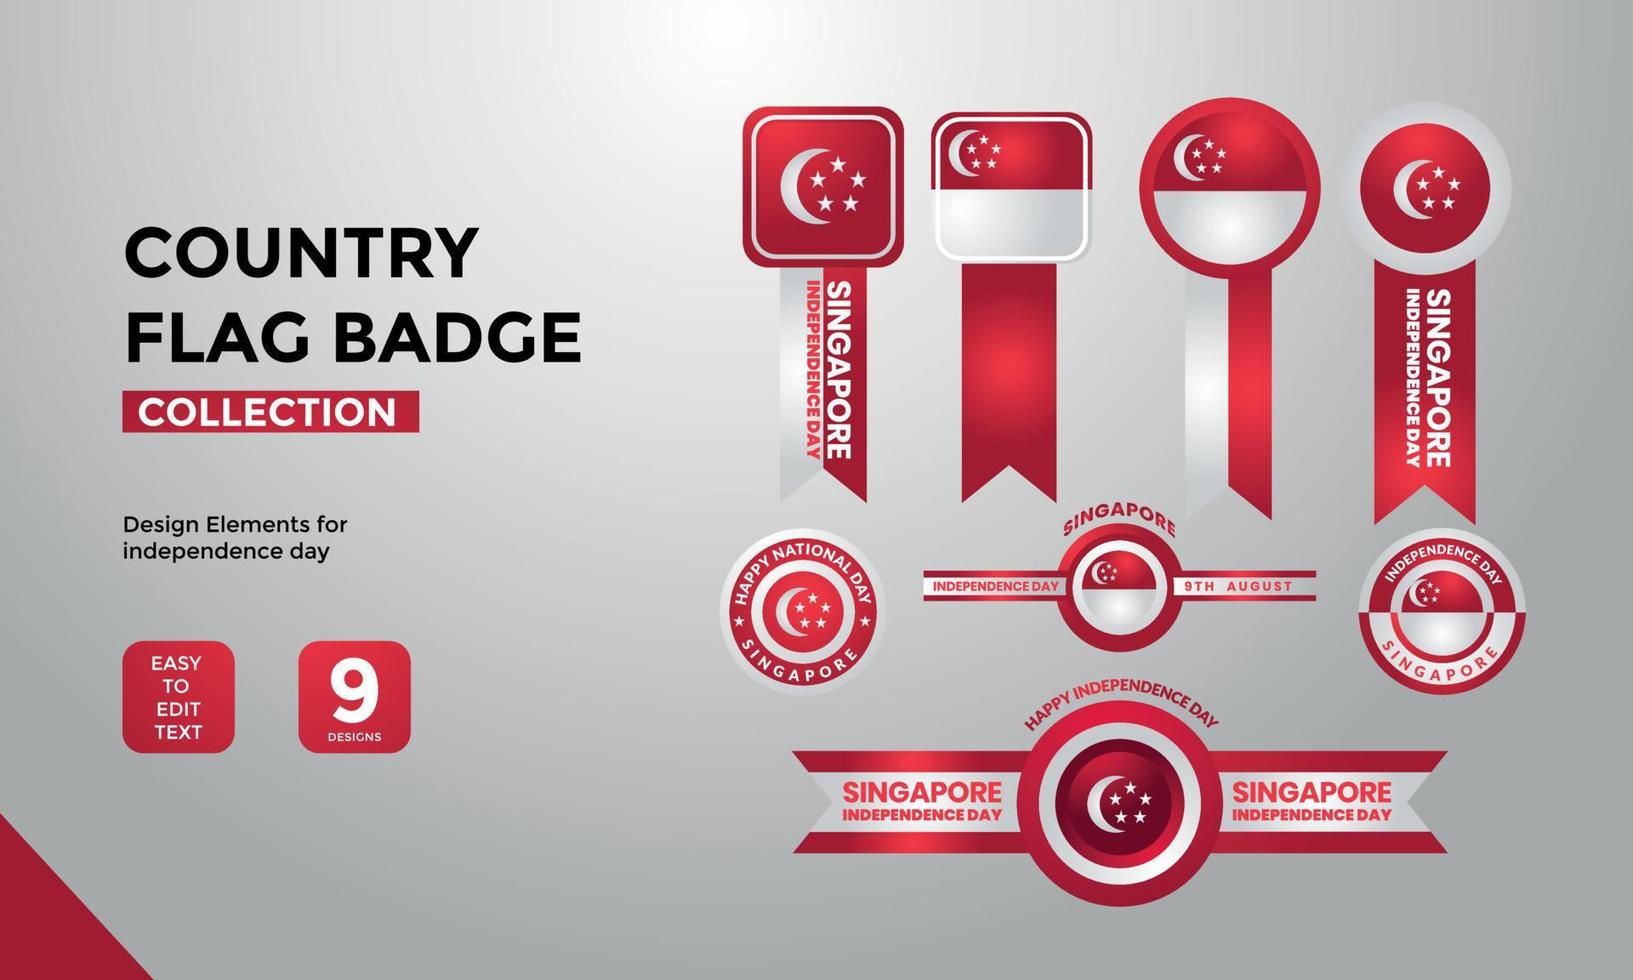 Singapore flag badge collection, for independence day greetings vector